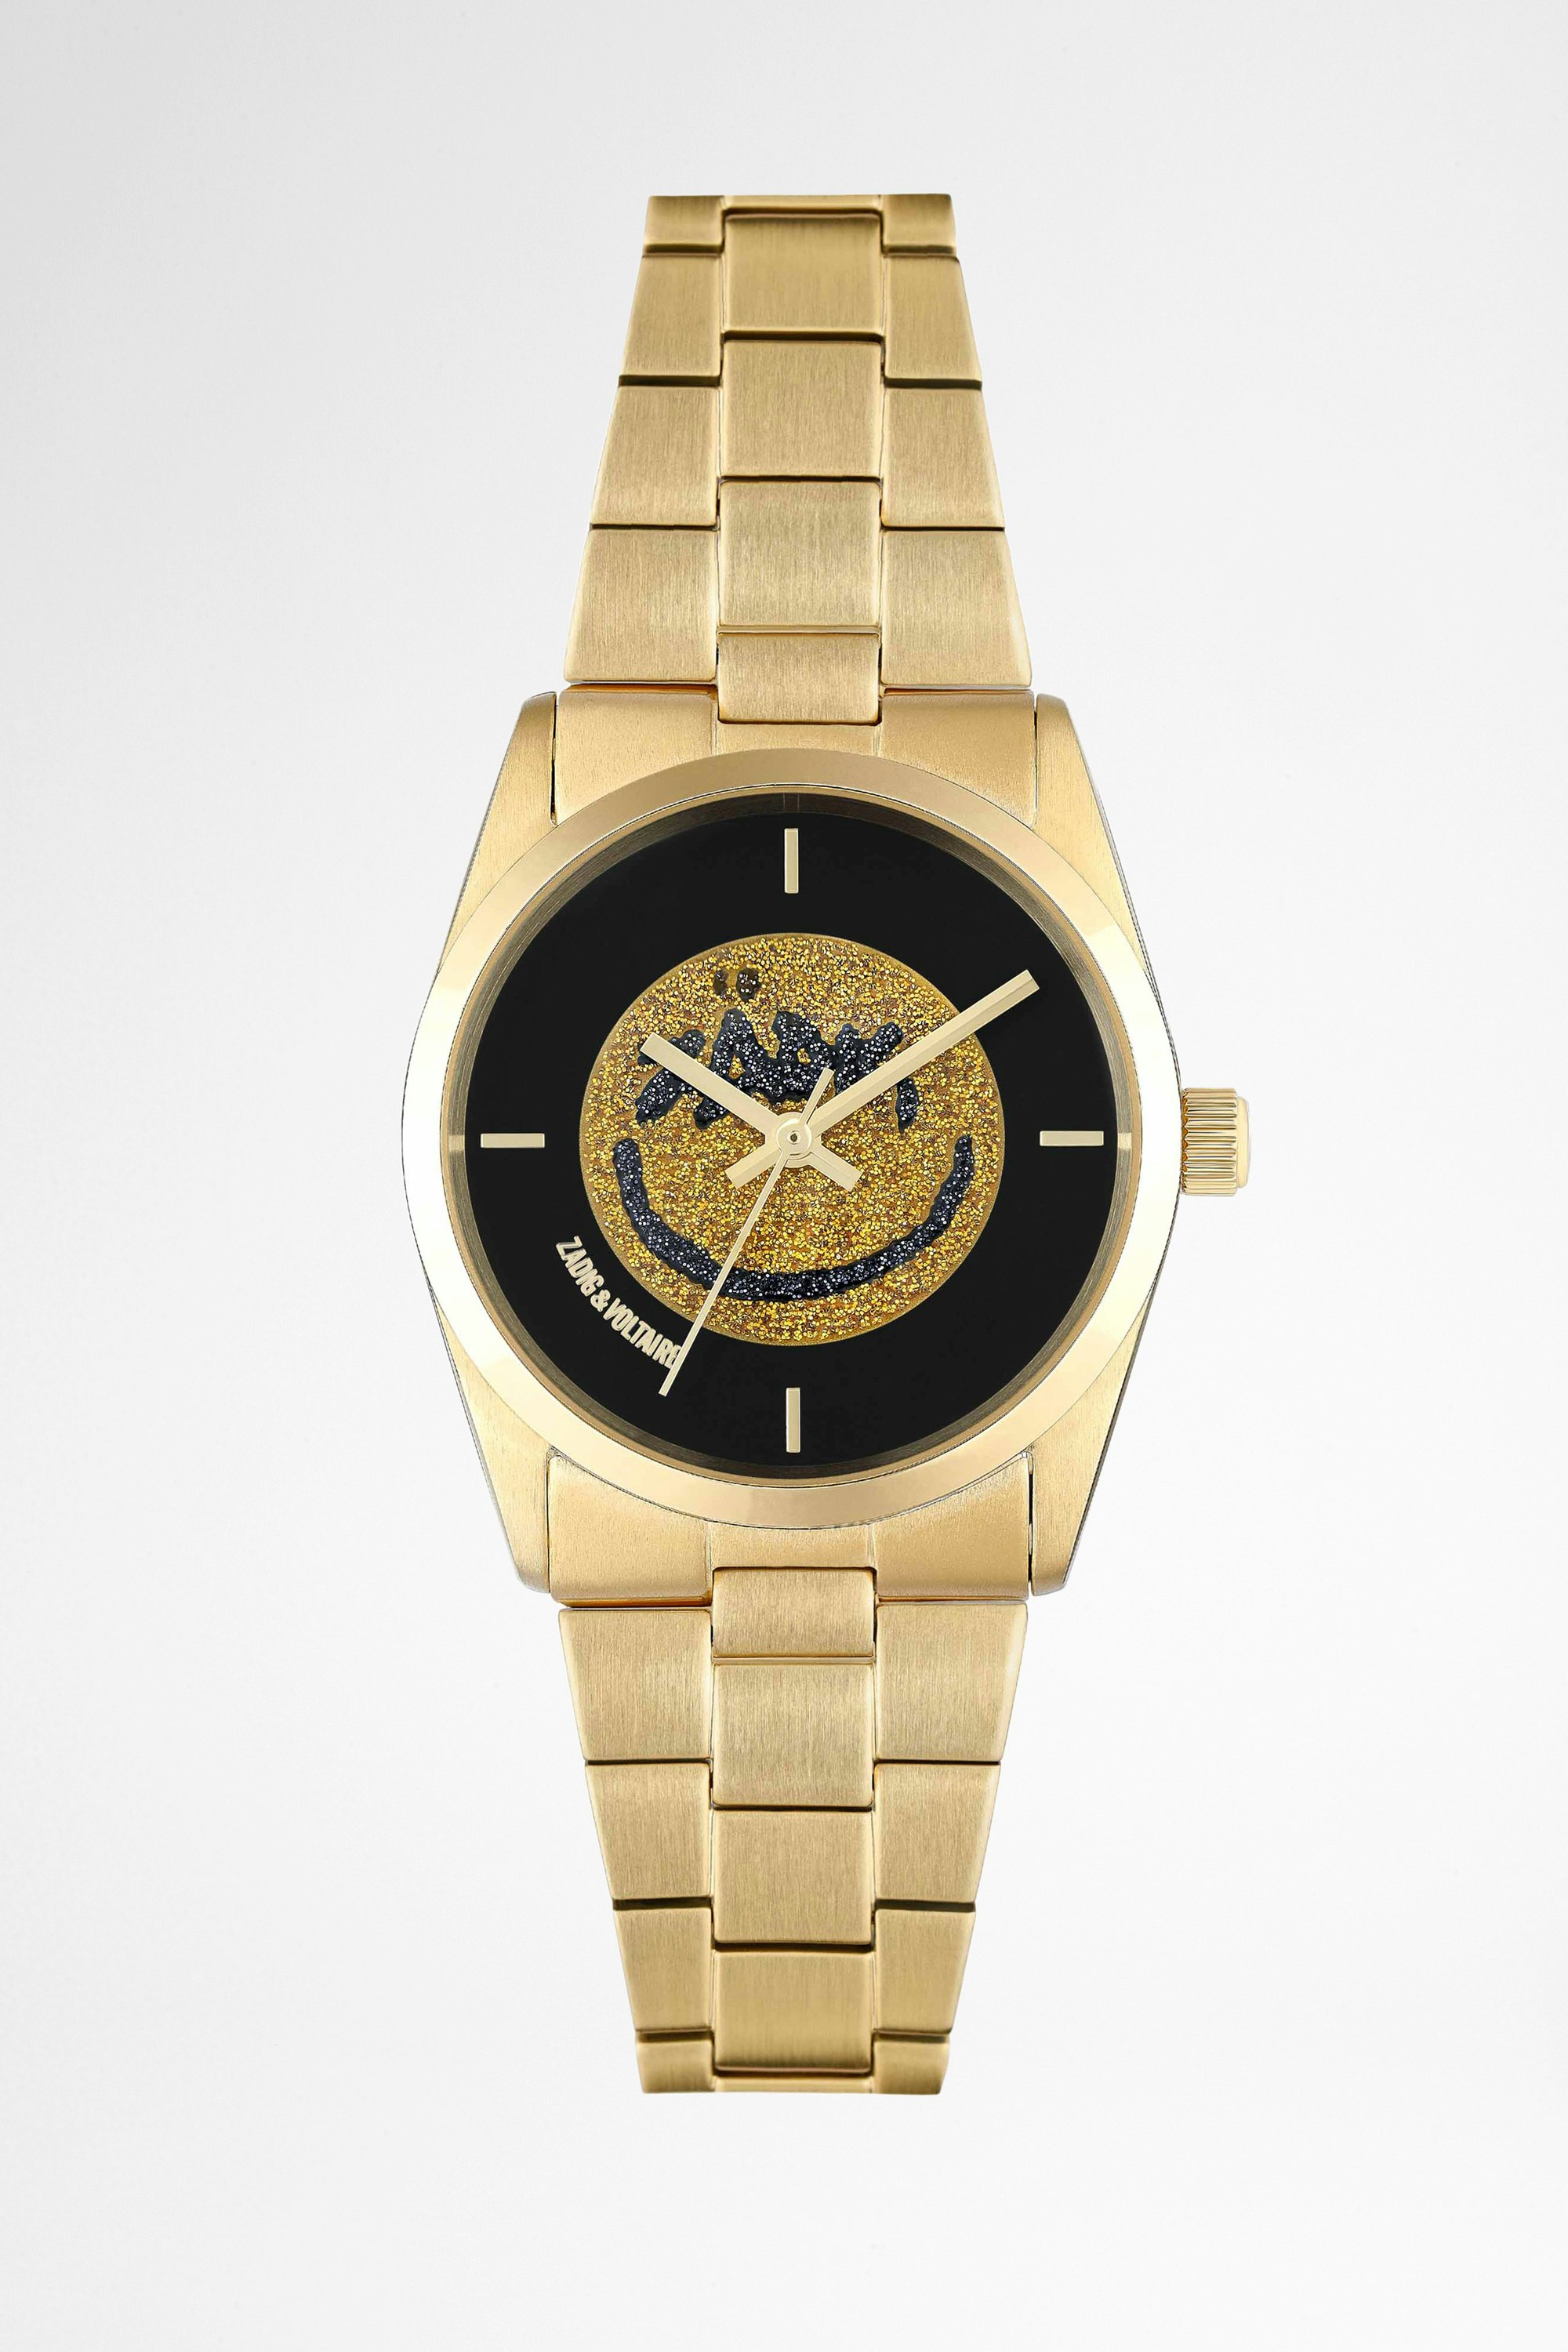 Fusion Happy Glitter ウォッチ Women’s gold-tone steel watch featuring a black dial with happy glitter background